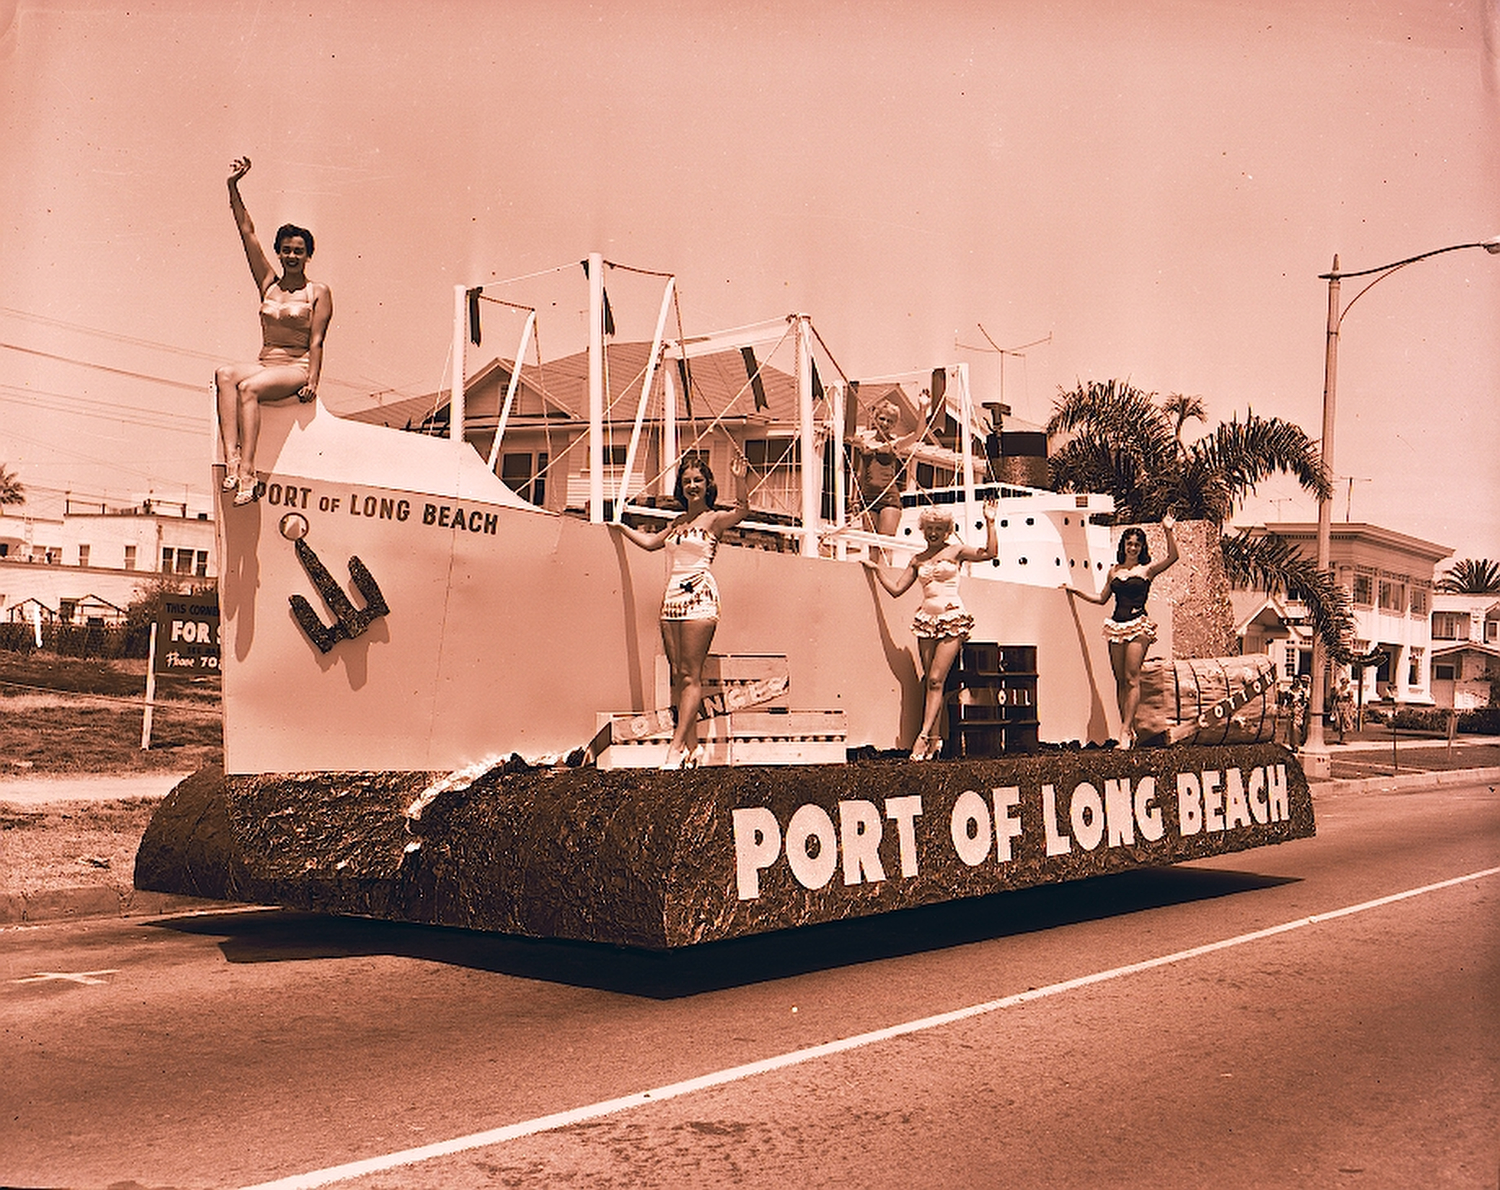 The Port was a big booster of the Miss Universe Pageant, which started in Long Beach in 1952. Here contestants ride a Port float in the annual pageant parade down Ocean Boulevard.